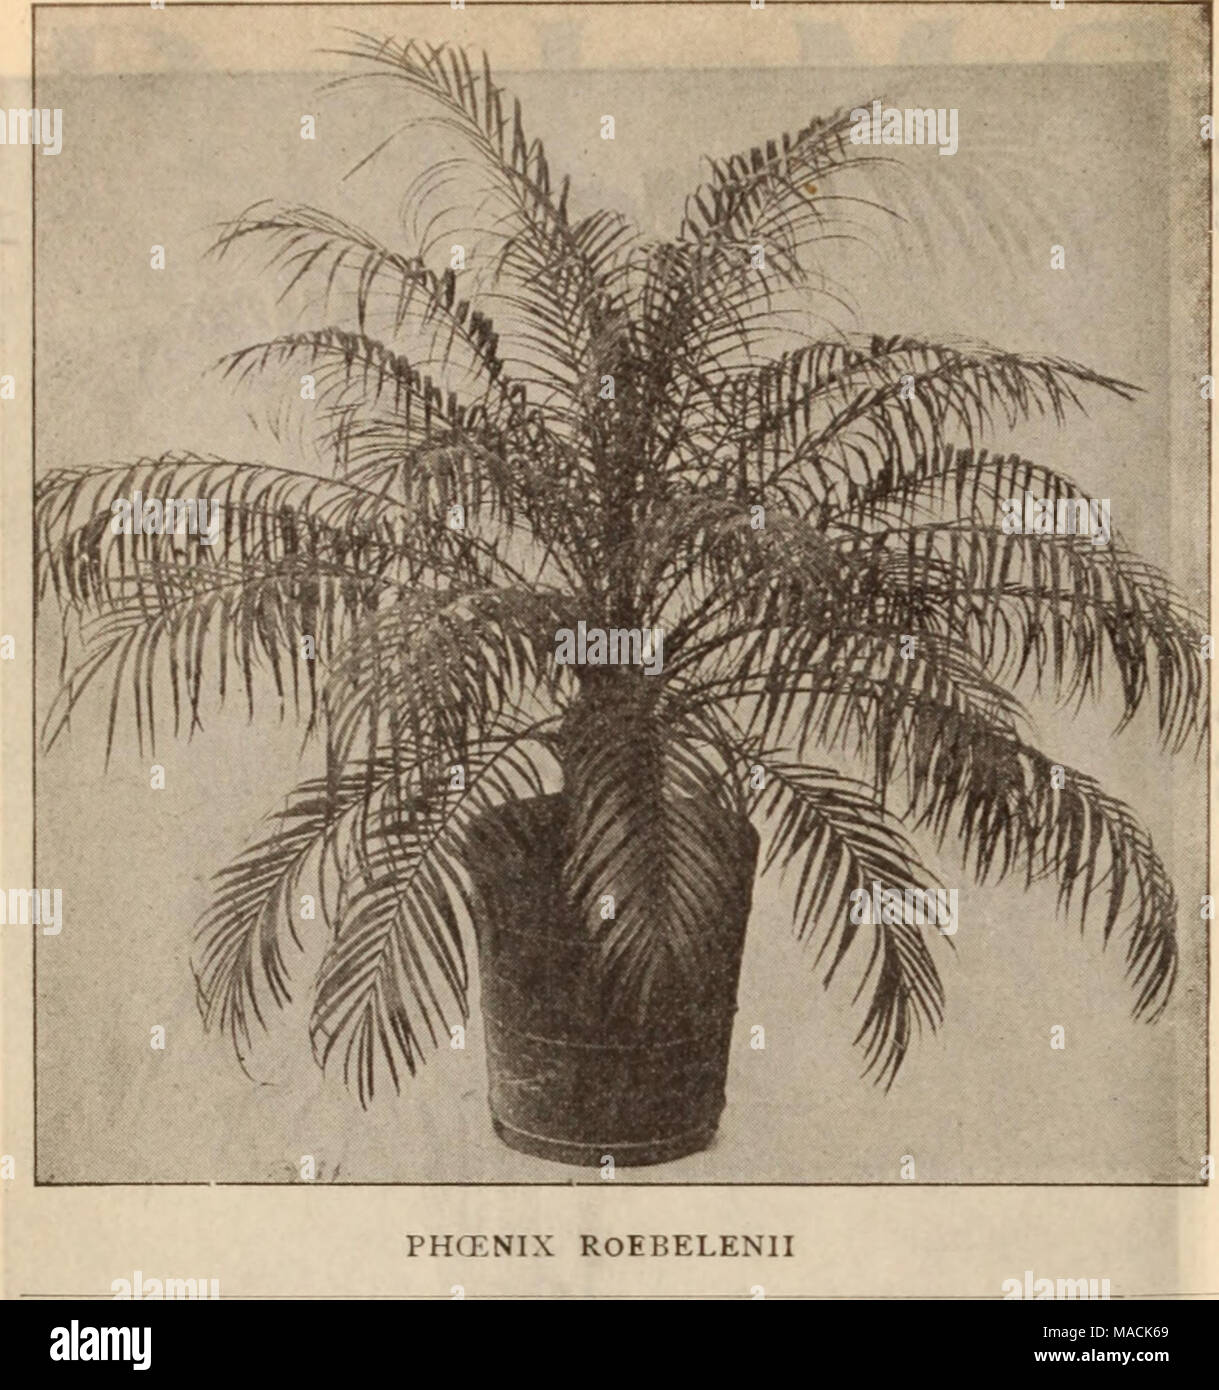 . Dreer's wholesale price list / Henry A. Dreer. . Palms -Continued Pritchardia Pacifica. Splendid plants of this fine hot-house Palm. 4- inch pots, 35 cts. each. 5- inch pots, Si.00 each. Ptychosperma Alexandrea. 4-inch pots, $2.50 per doz. Roscheria Melanochaetes. A rare hot-house Palm, makes a fine exhibition plant. 5-inch pots, $2.00 each. Thrinax Parviflora. A pretty species in which the palmate leaves are narrowly divided, very erraceful. 2'/4-inch pots, $1.50 per doz.: $10.00 per 100. 3 &quot; &quot; 2.00 &quot; 15.00 Thrinax Morrisii. Leaves divided into vary narrow segments of dwarf h Stock Photo